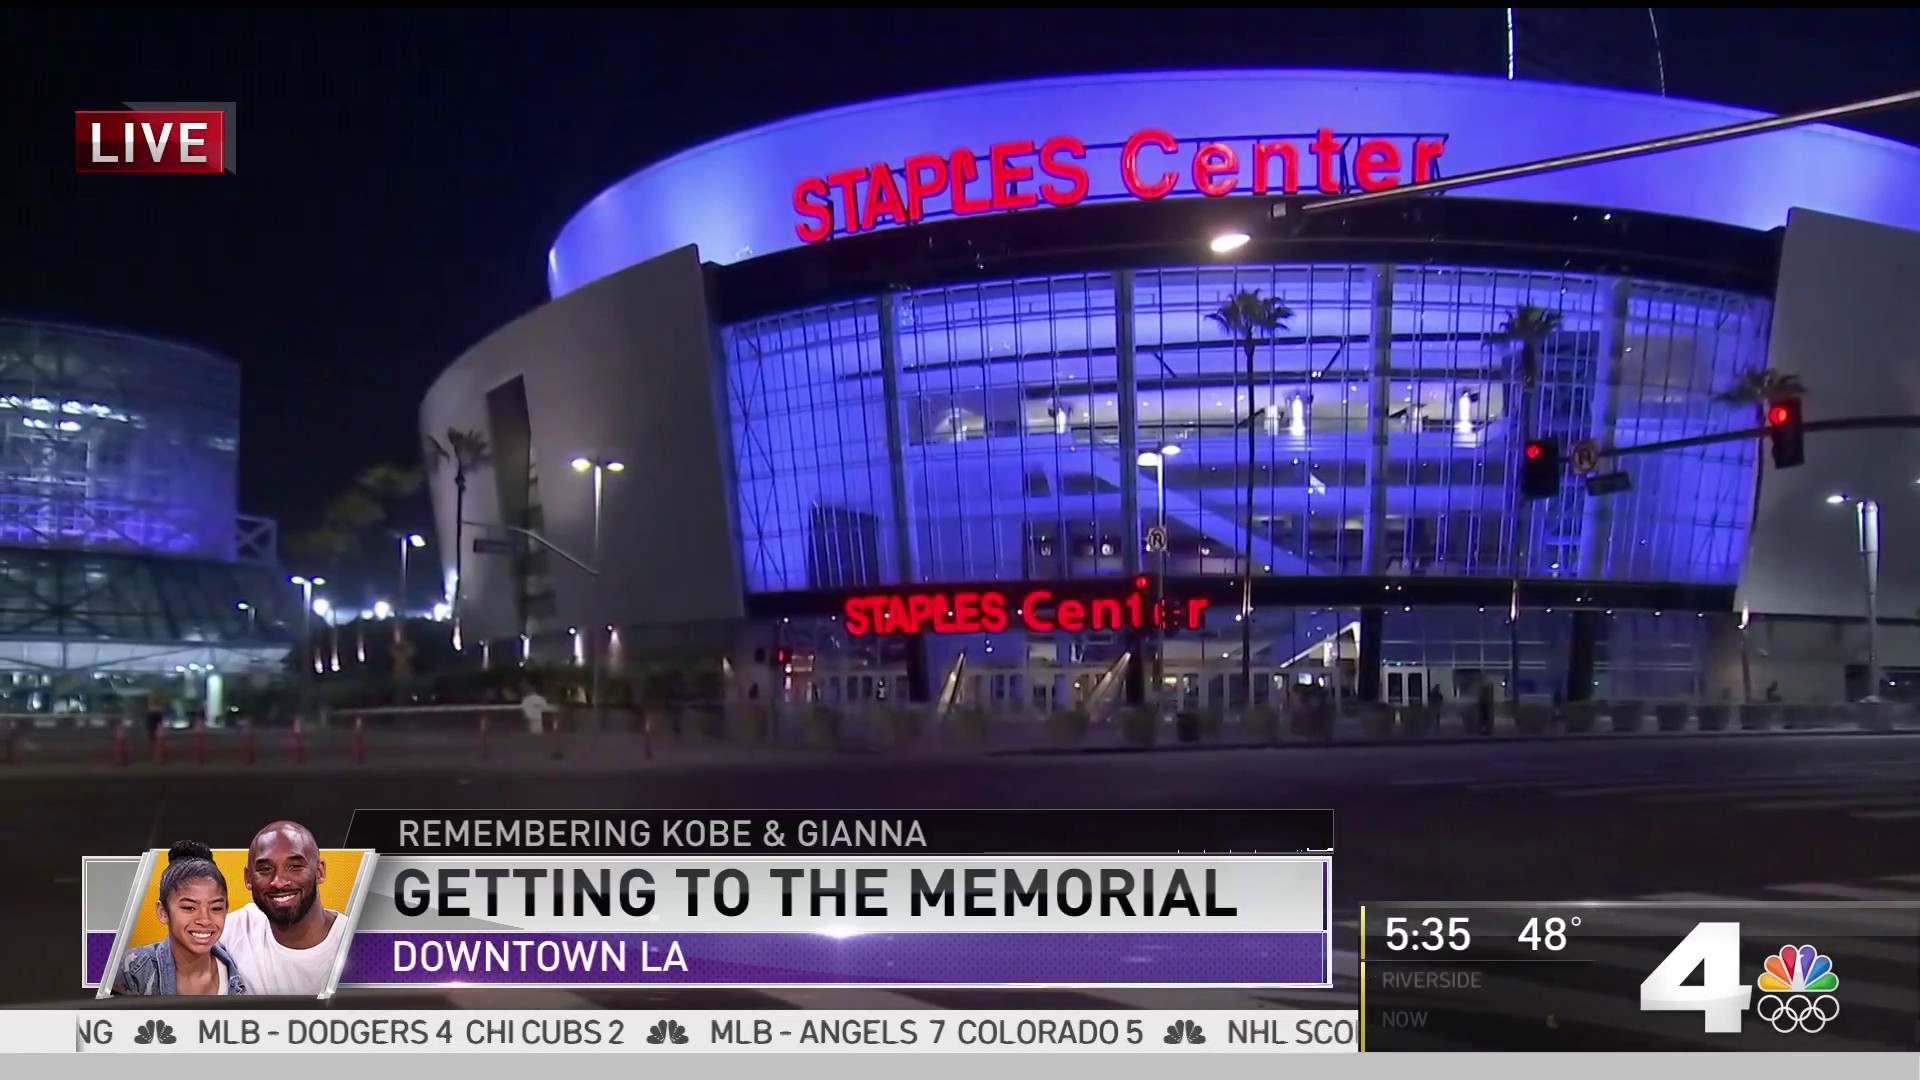 Kobe Bryant memorial: Powerful symbolism behind 2/24 Staples Center event -  Los Angeles Times